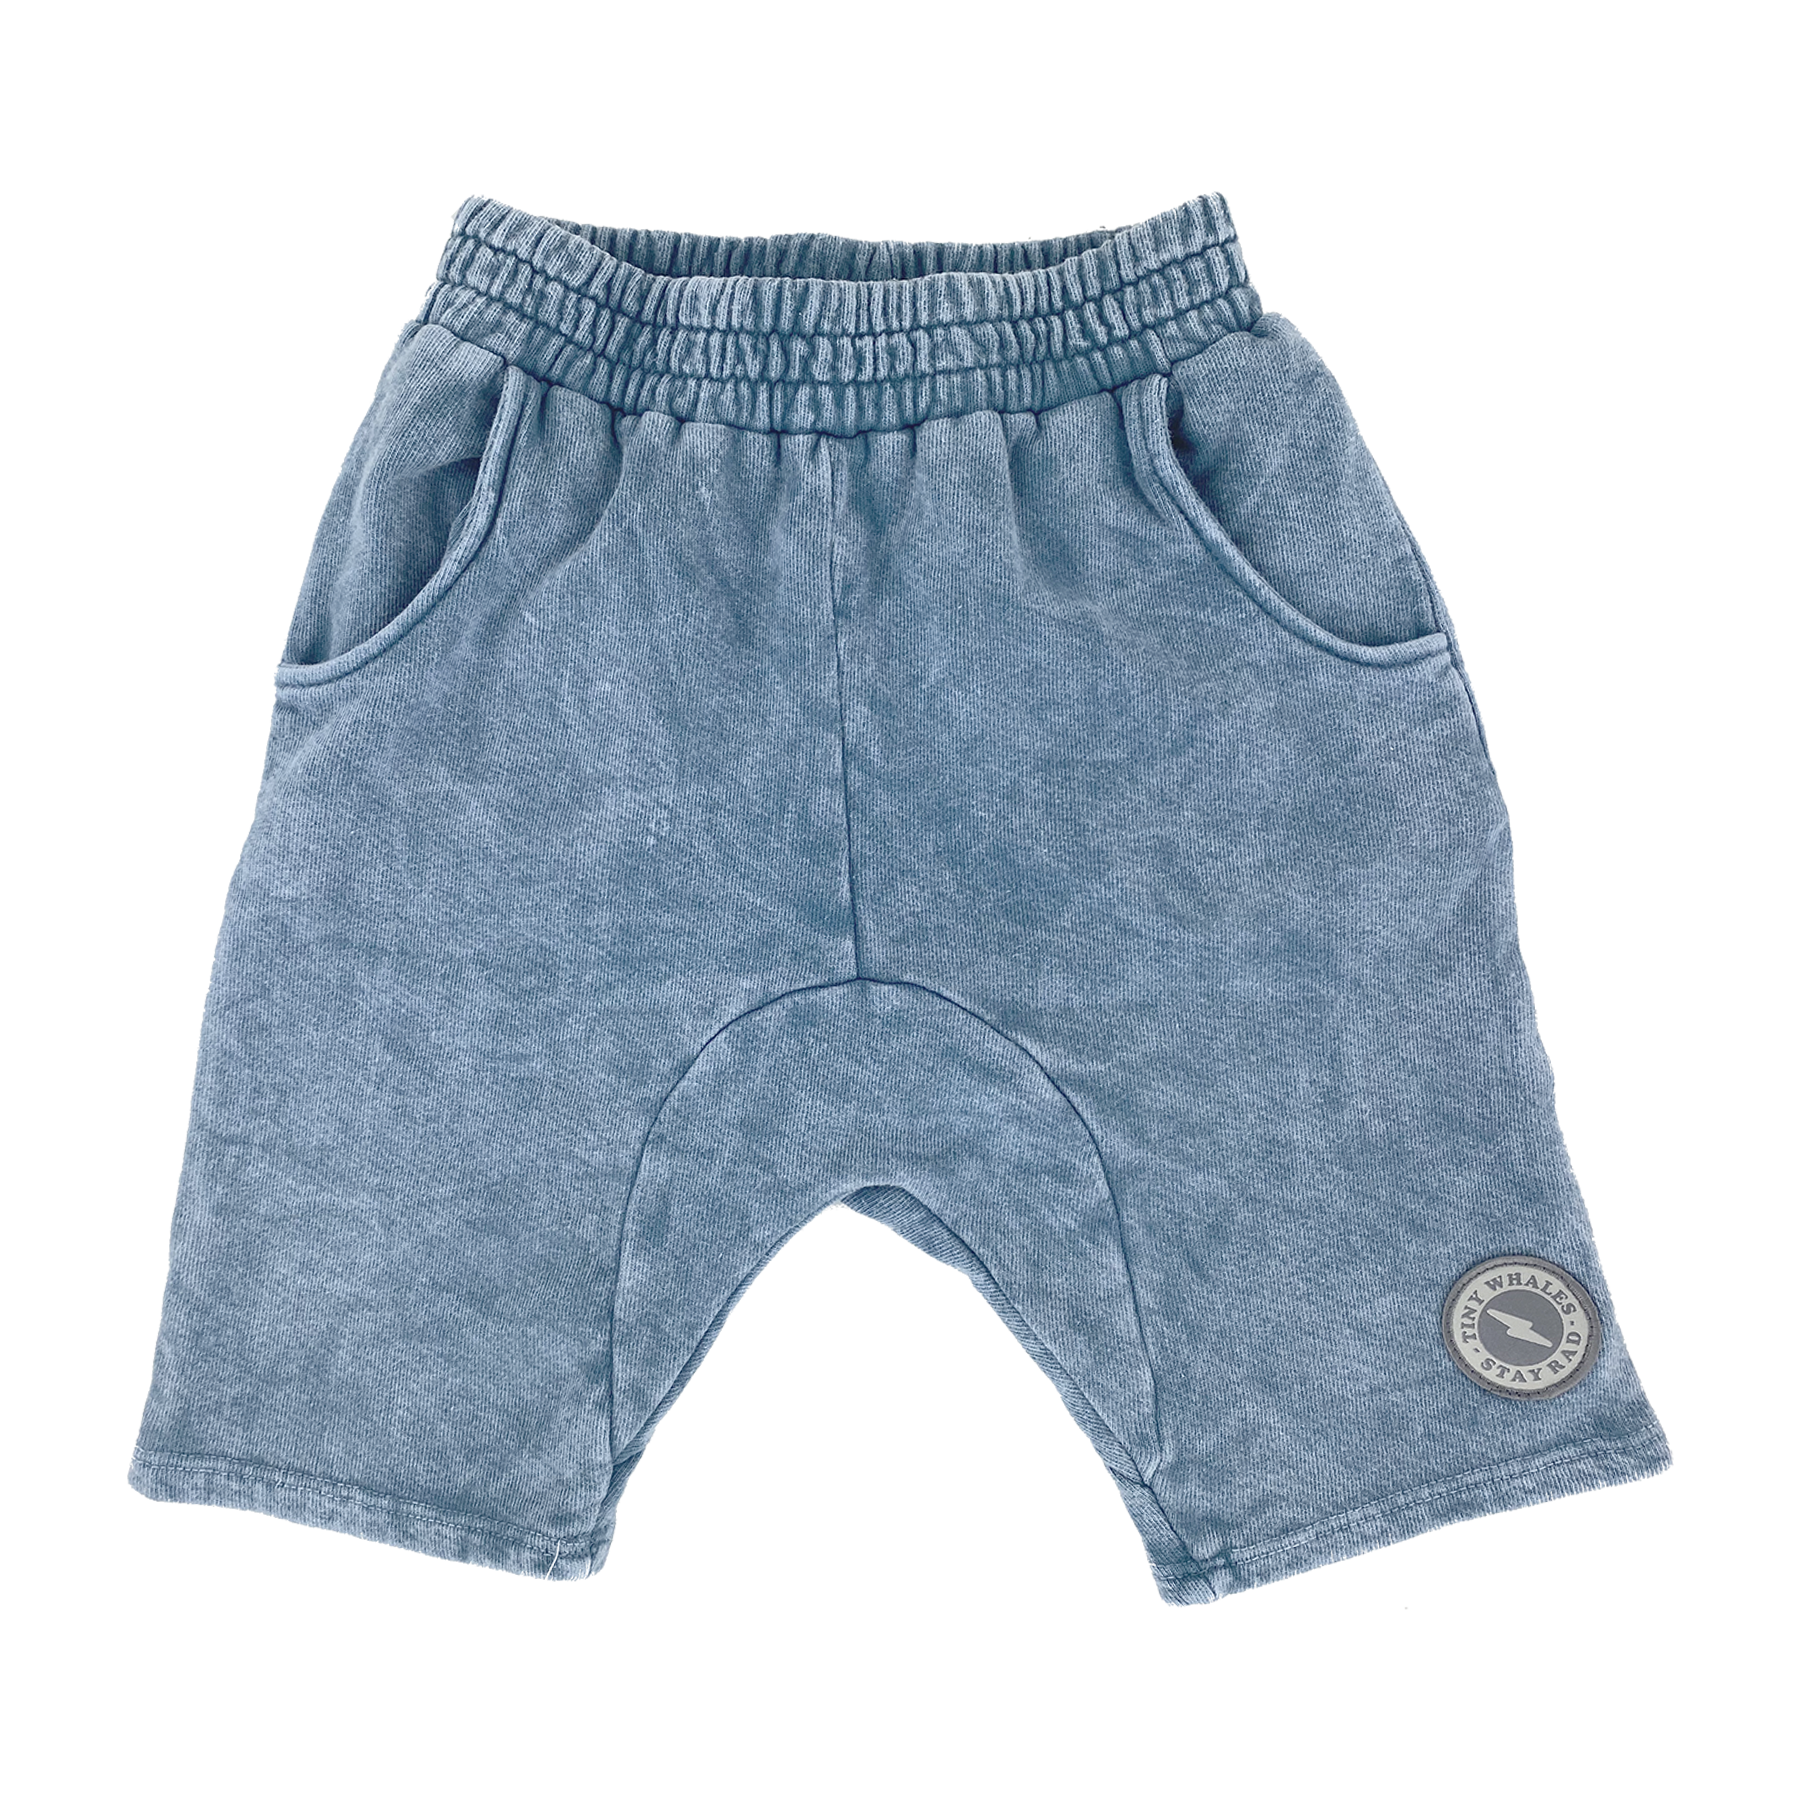 Tiny Whales Rogue Cozy Boys Shorts - Twinkle Twinkle Little One